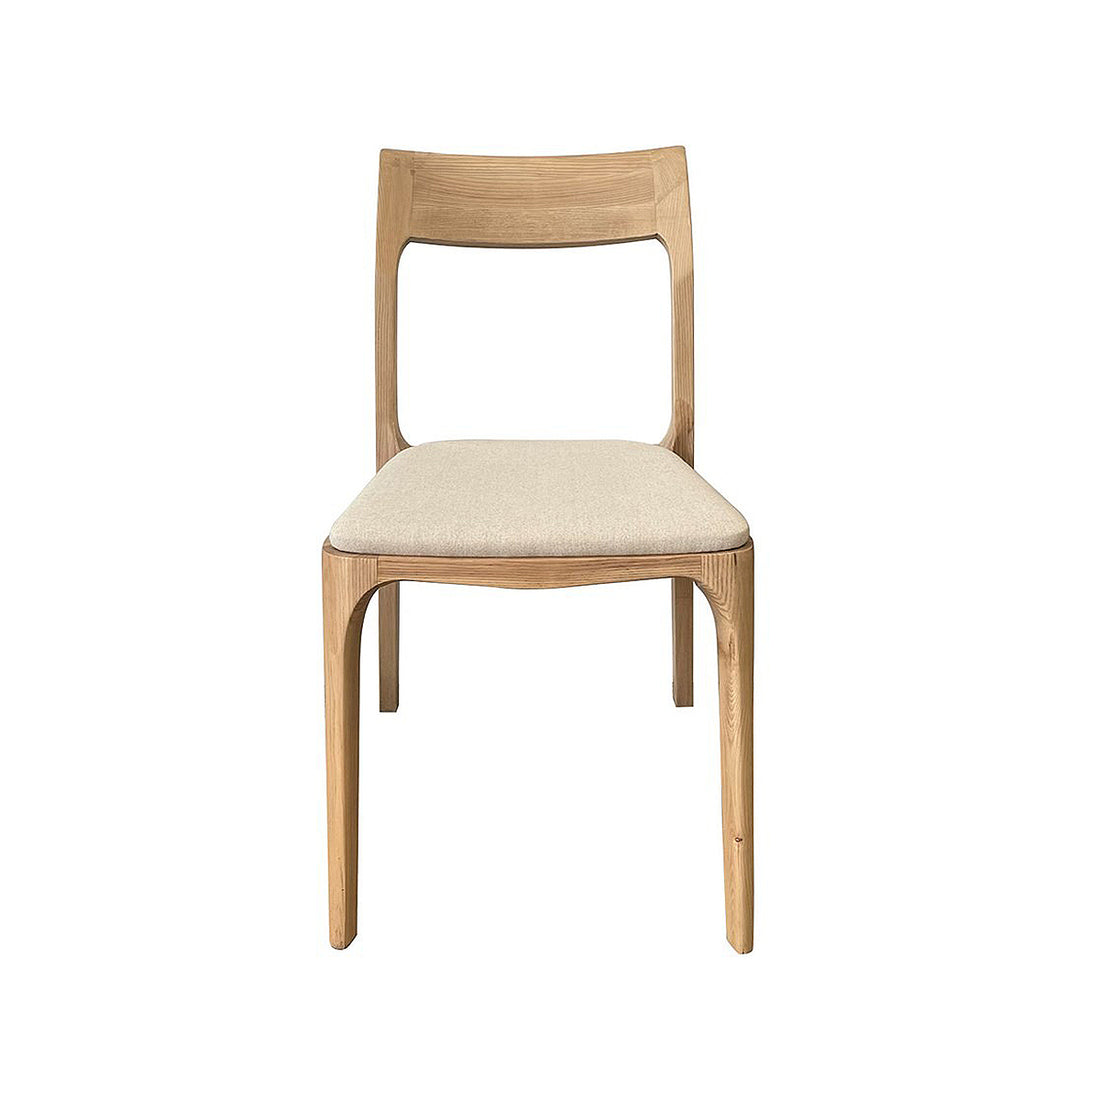  Cooper Linen Dining Chair - SOUK COLLECTIVE